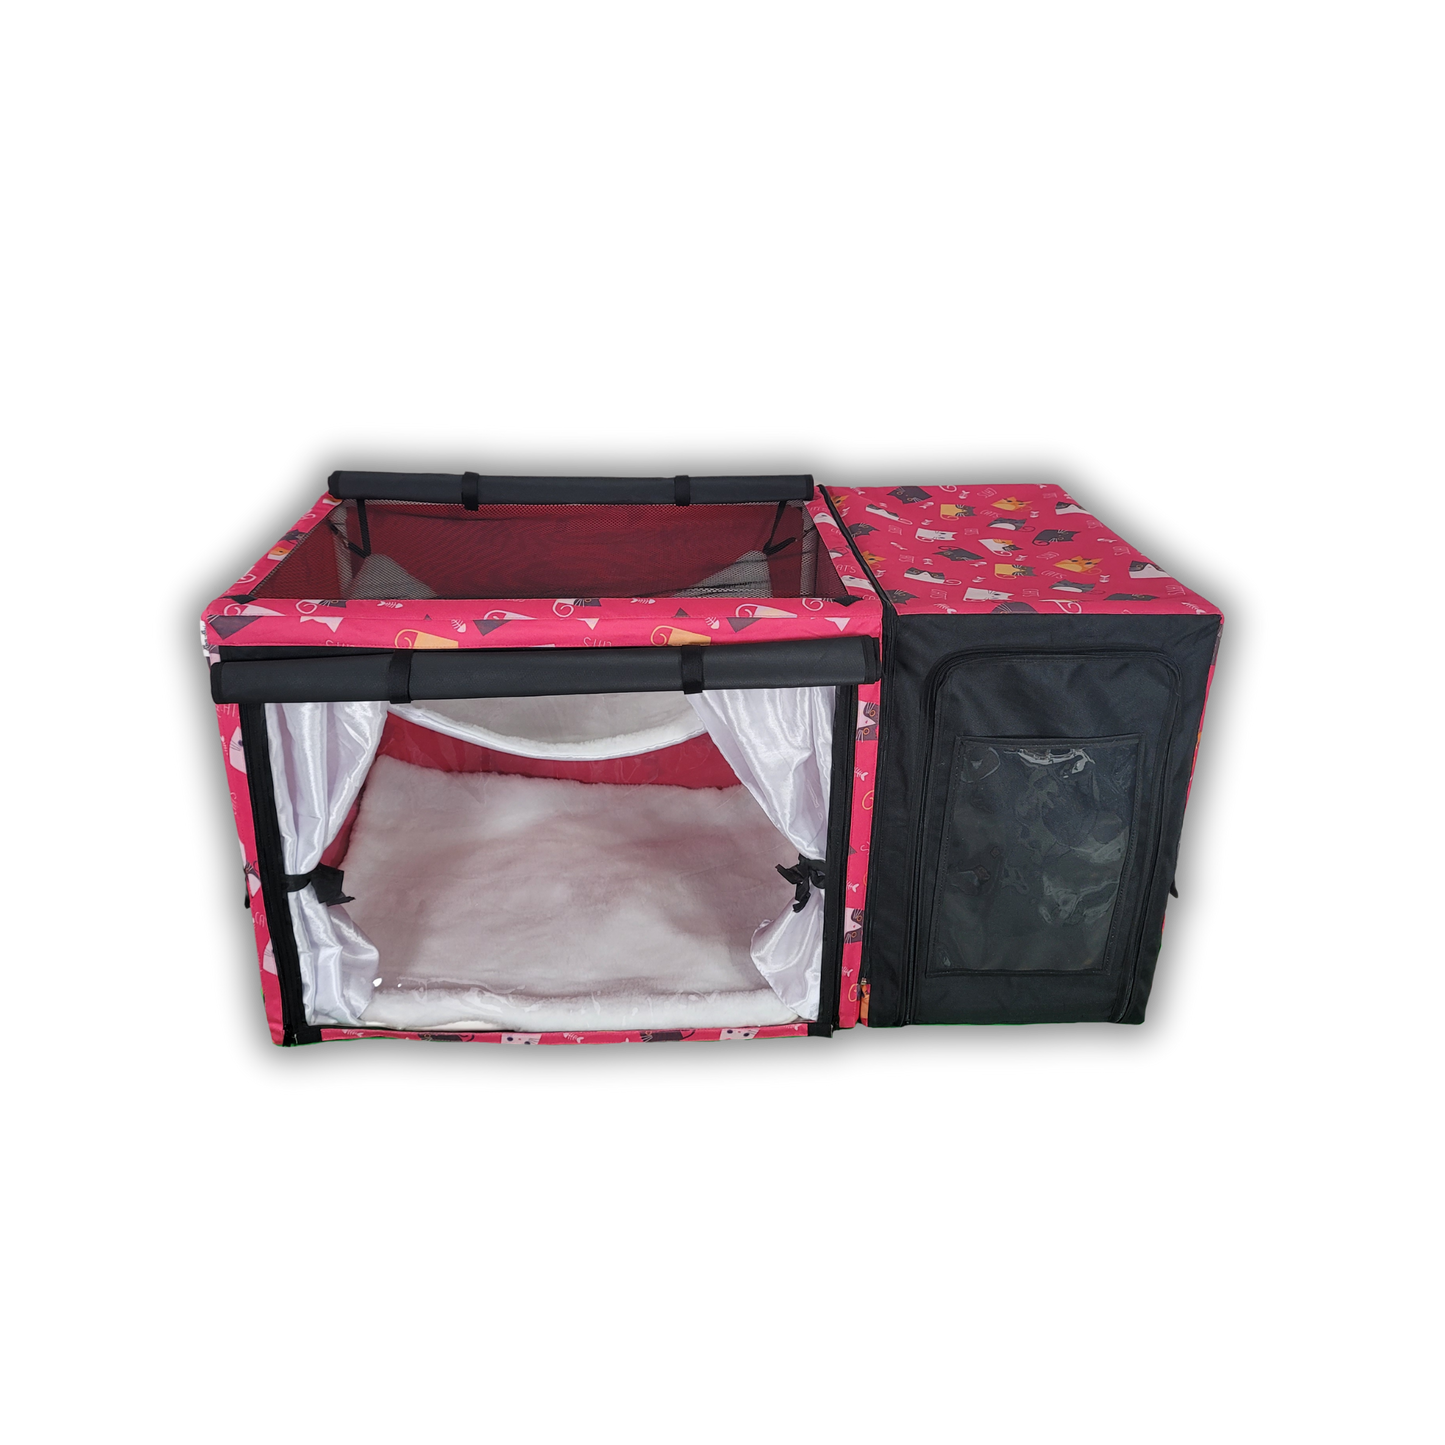 Show Cage (Pink Cats)